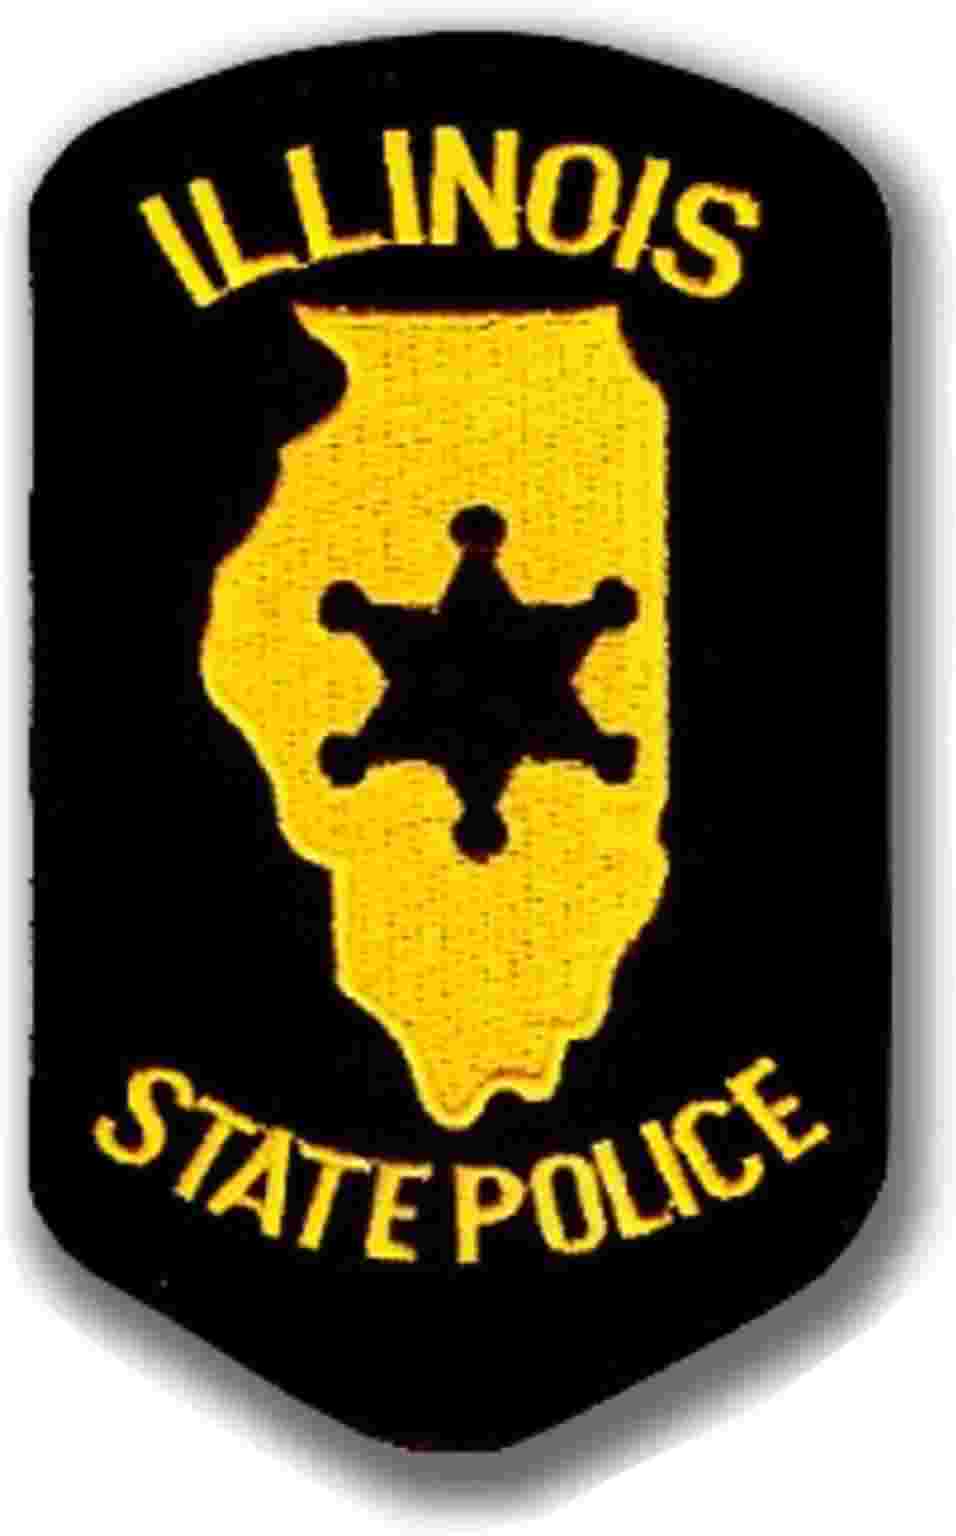 police state illinois chicago carry concealed badge isp foid county card williamson highway renewals address identification firearm trooper fatal crash